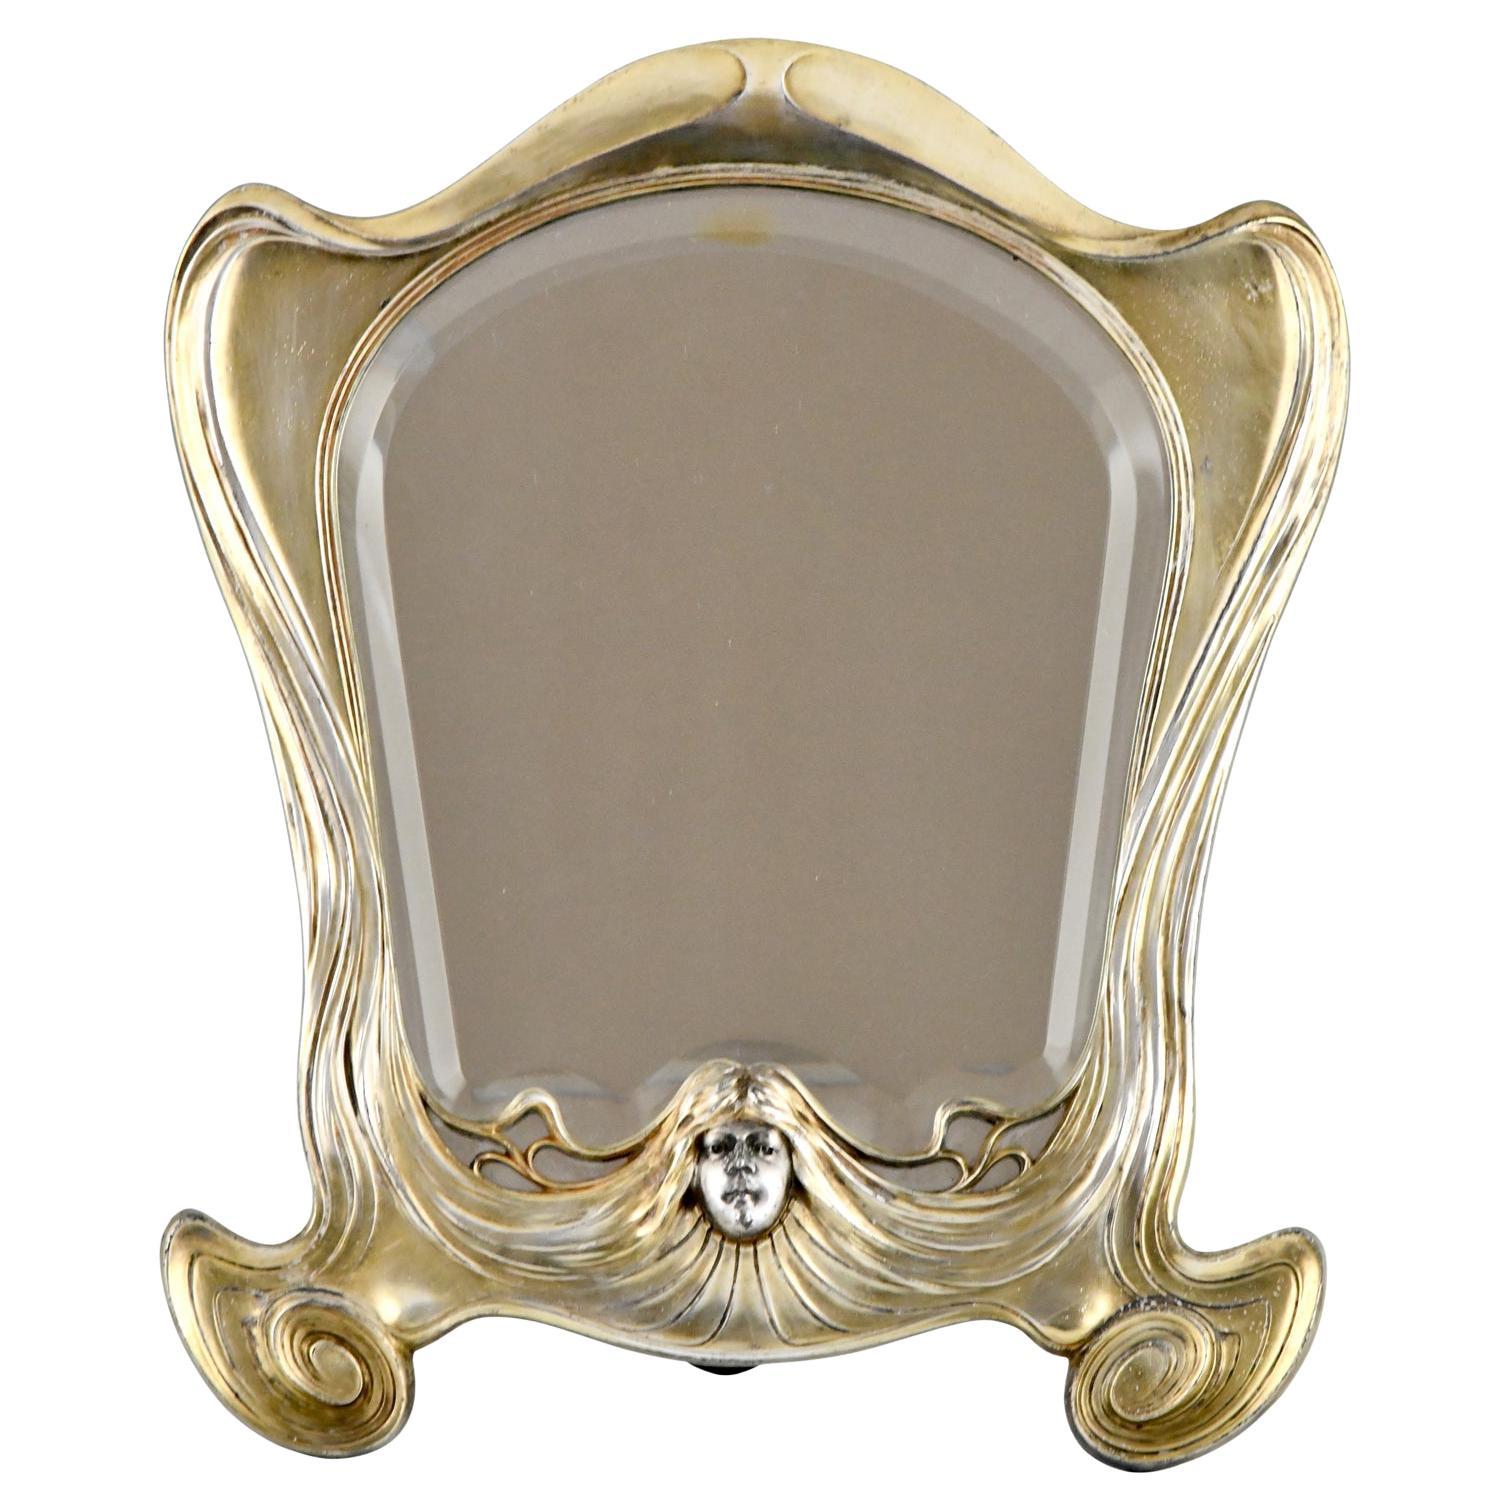 Art Nouveau mirror with face of a woman by Orivit, Germany 1900